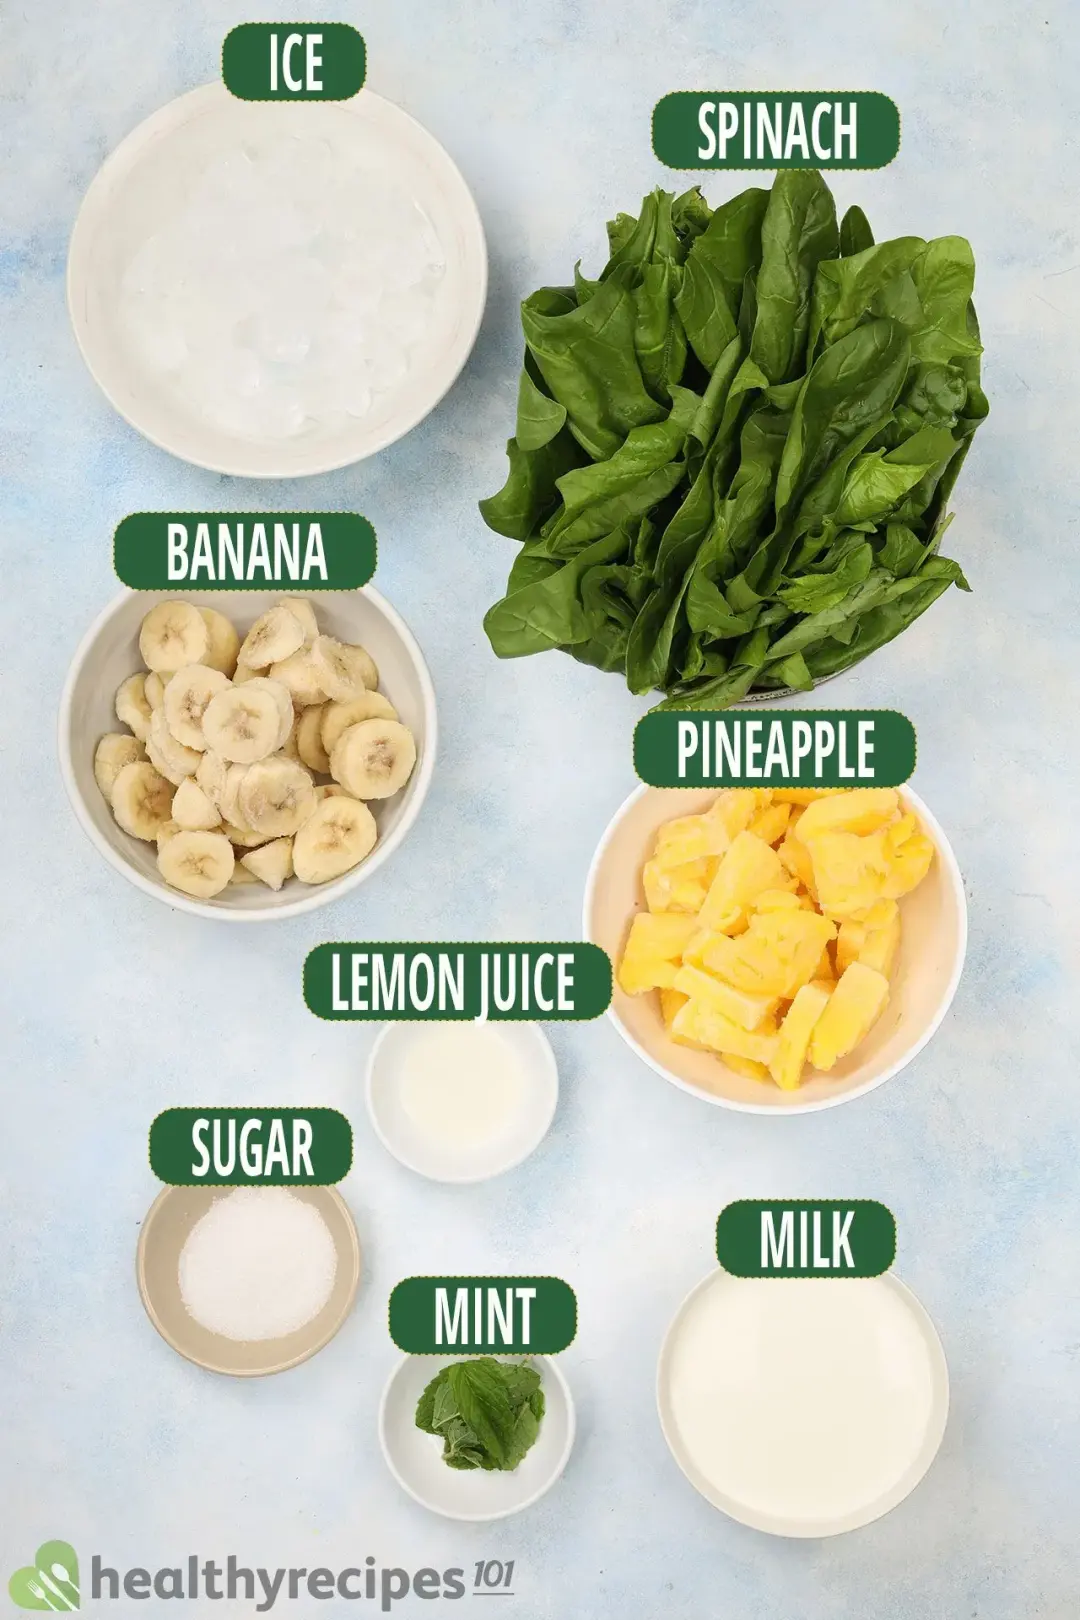 Ingredients for Spinach Smoothie